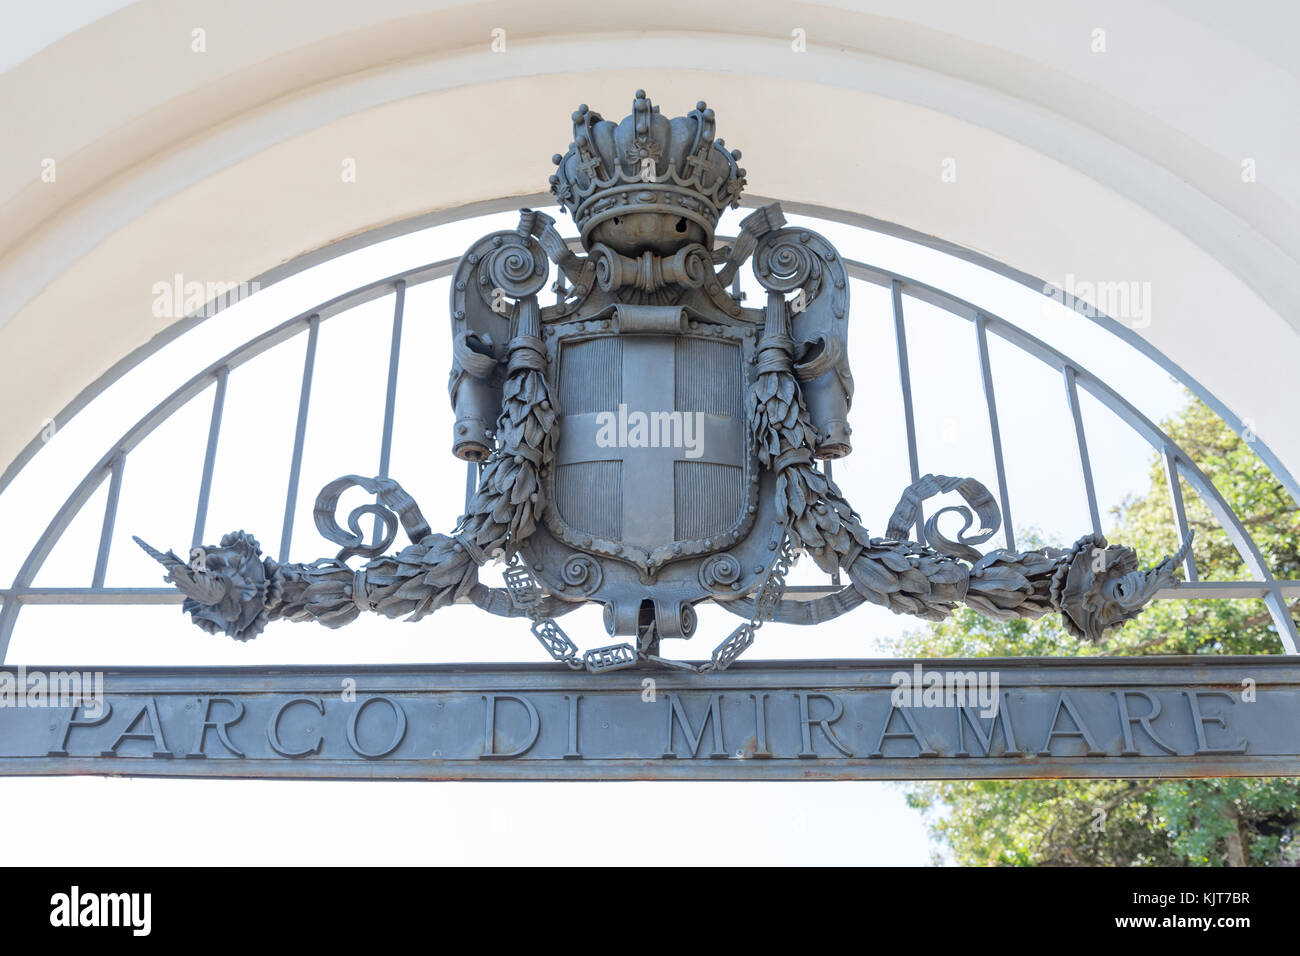 Metal ornament at the entrance of the Park of Miramare, the castle of former Habsburg Member, Maximilian, Emperor of Mexico, near Triest, Italy Stock Photo